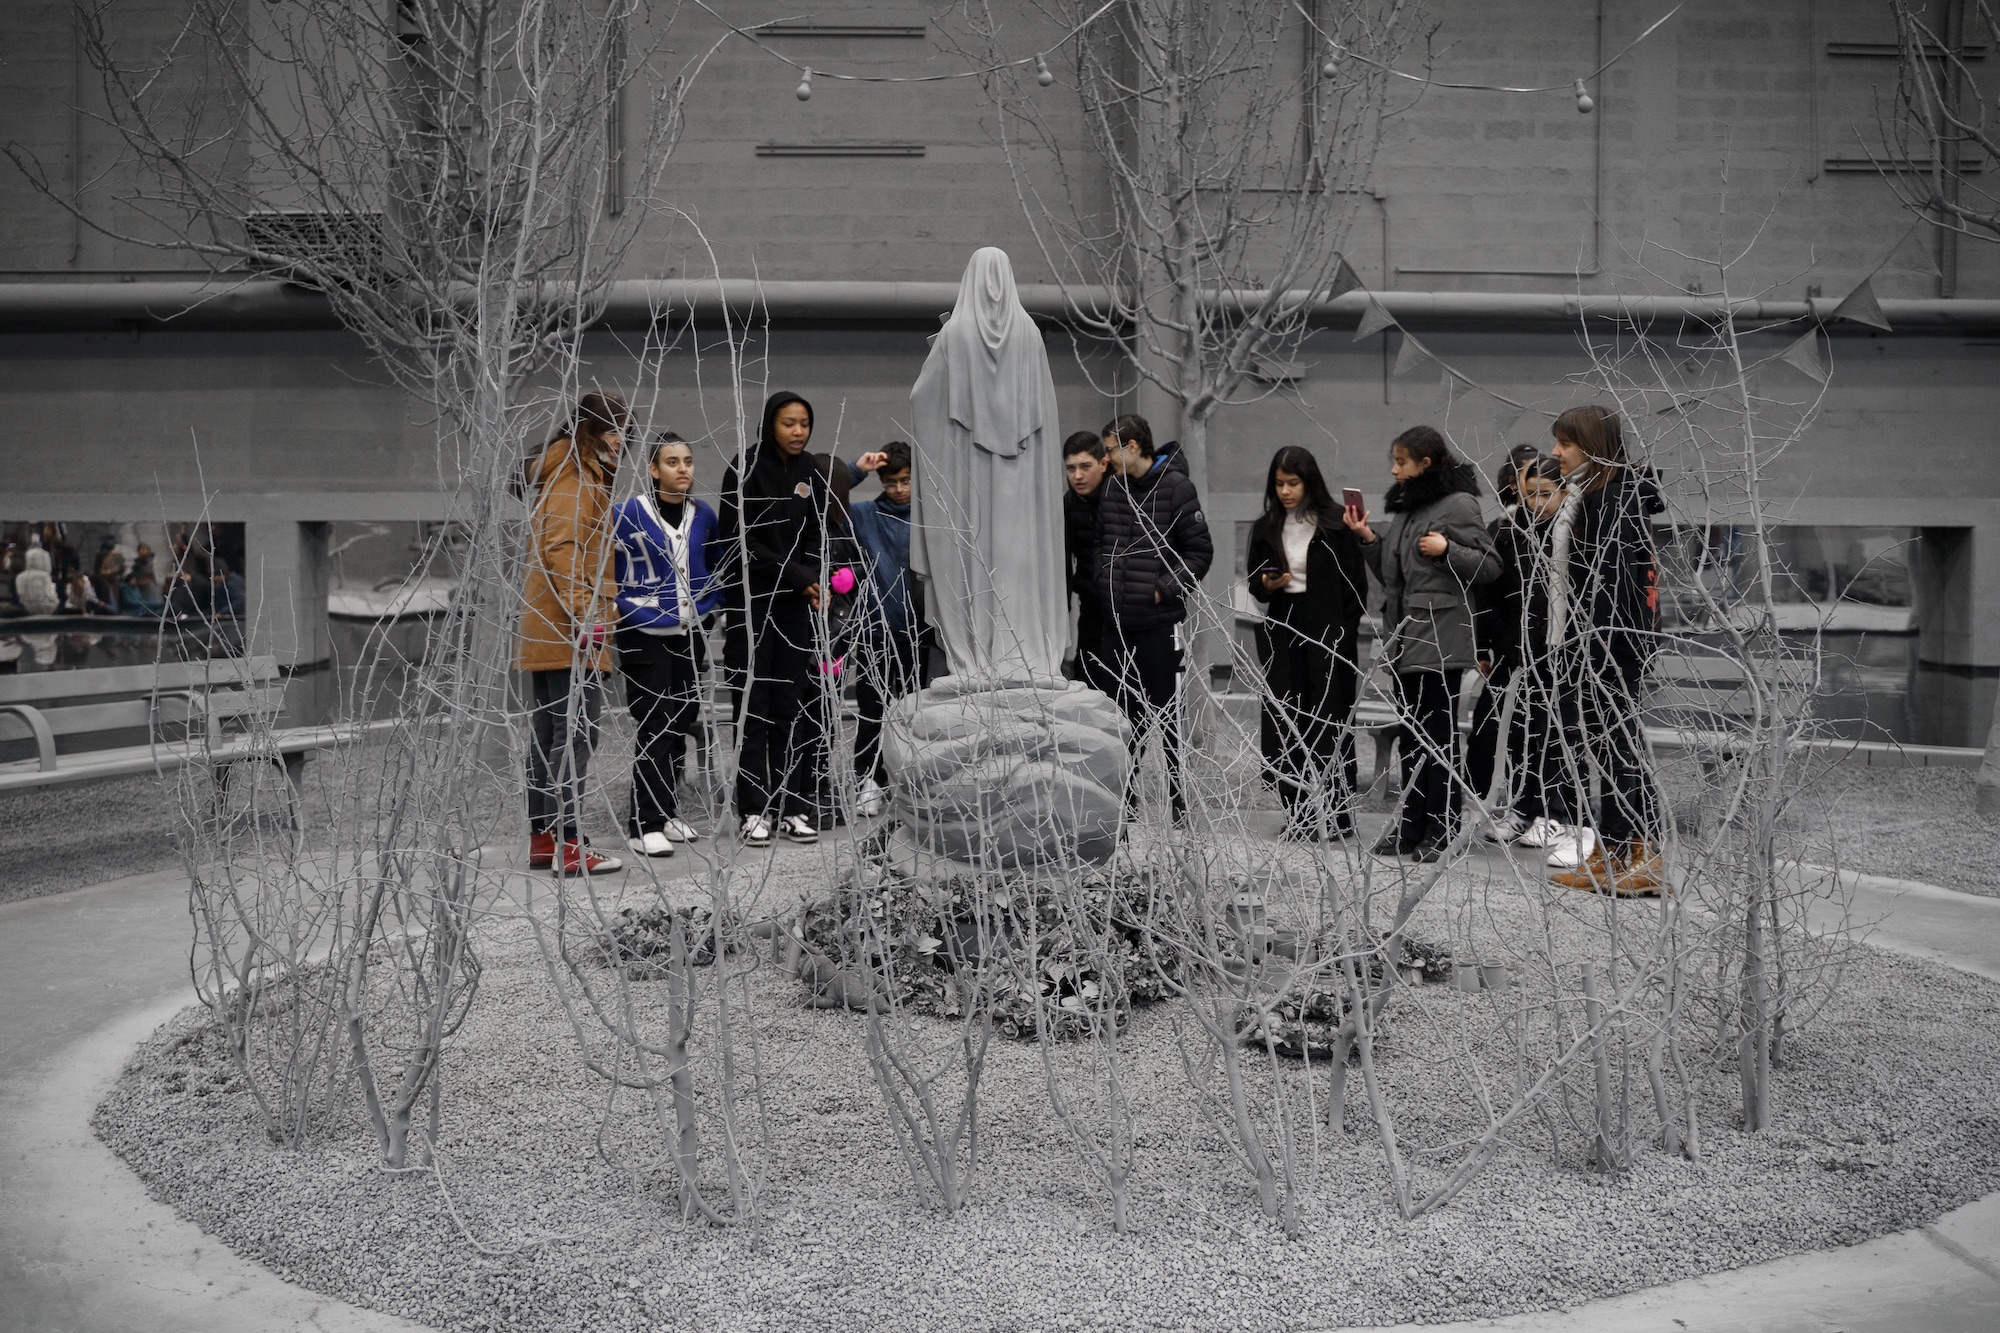 Visitors find themselves inside an art installation completely clad in grey.